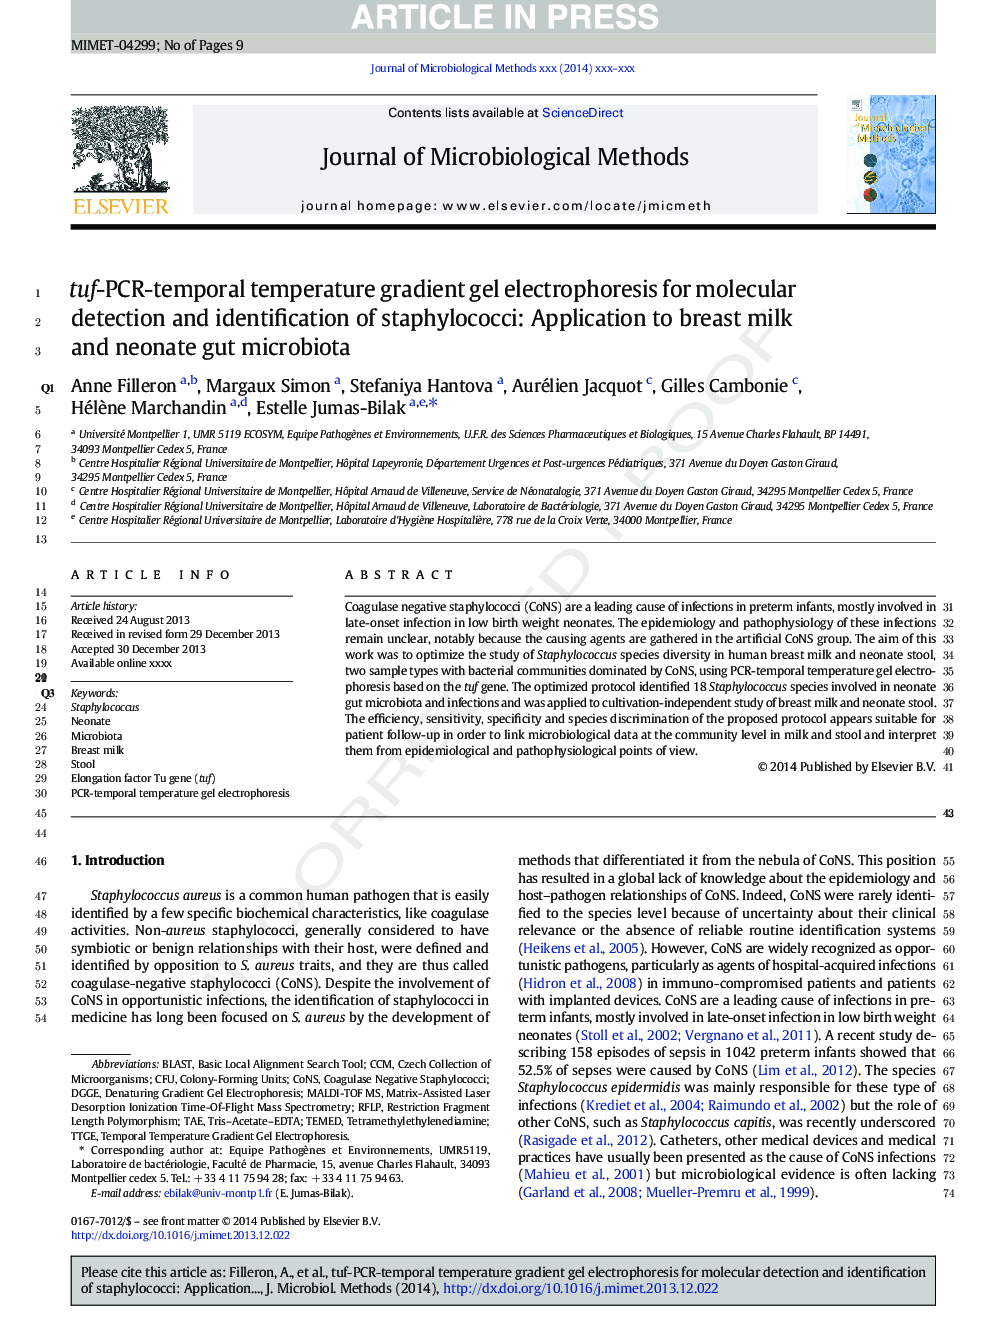 tuf-PCR-temporal temperature gradient gel electrophoresis for molecular detection and identification of staphylococci: Application to breast milk and neonate gut microbiota